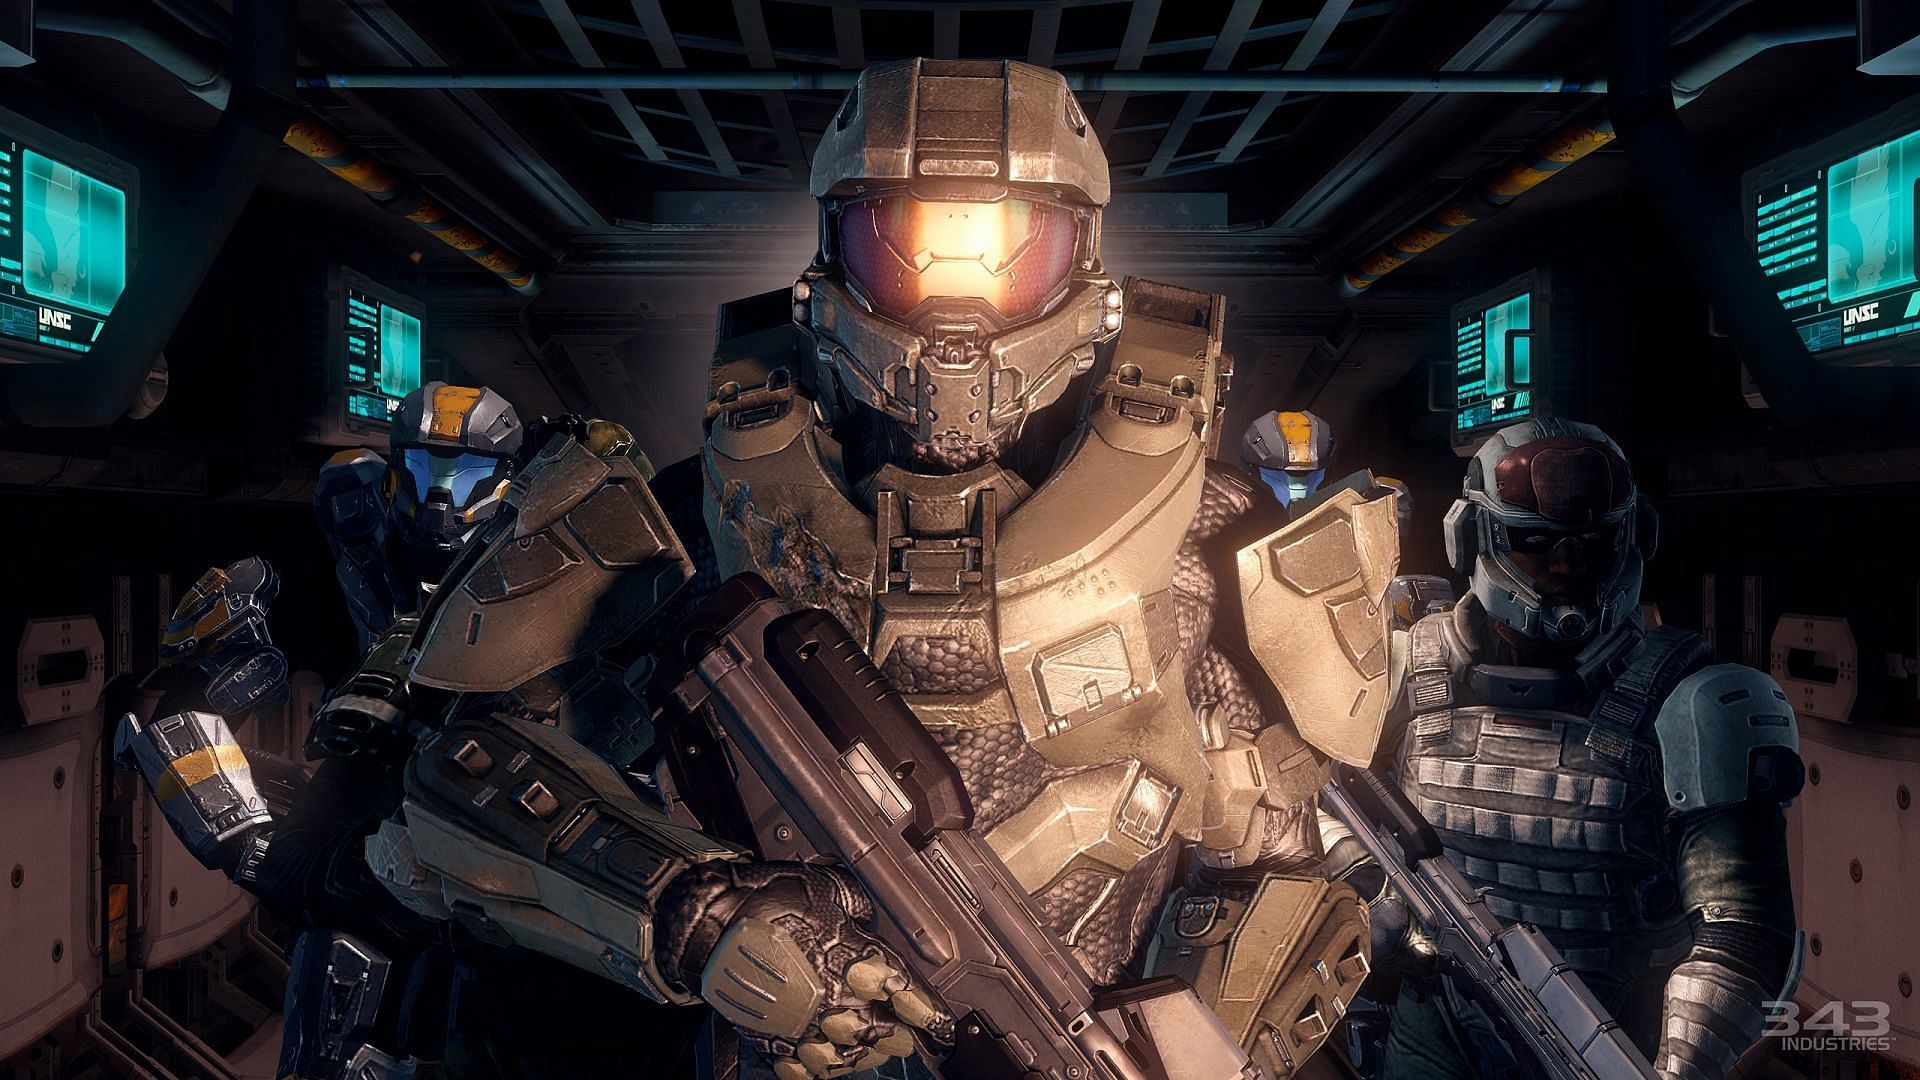 Master Chief in Halo along with two other soldiers